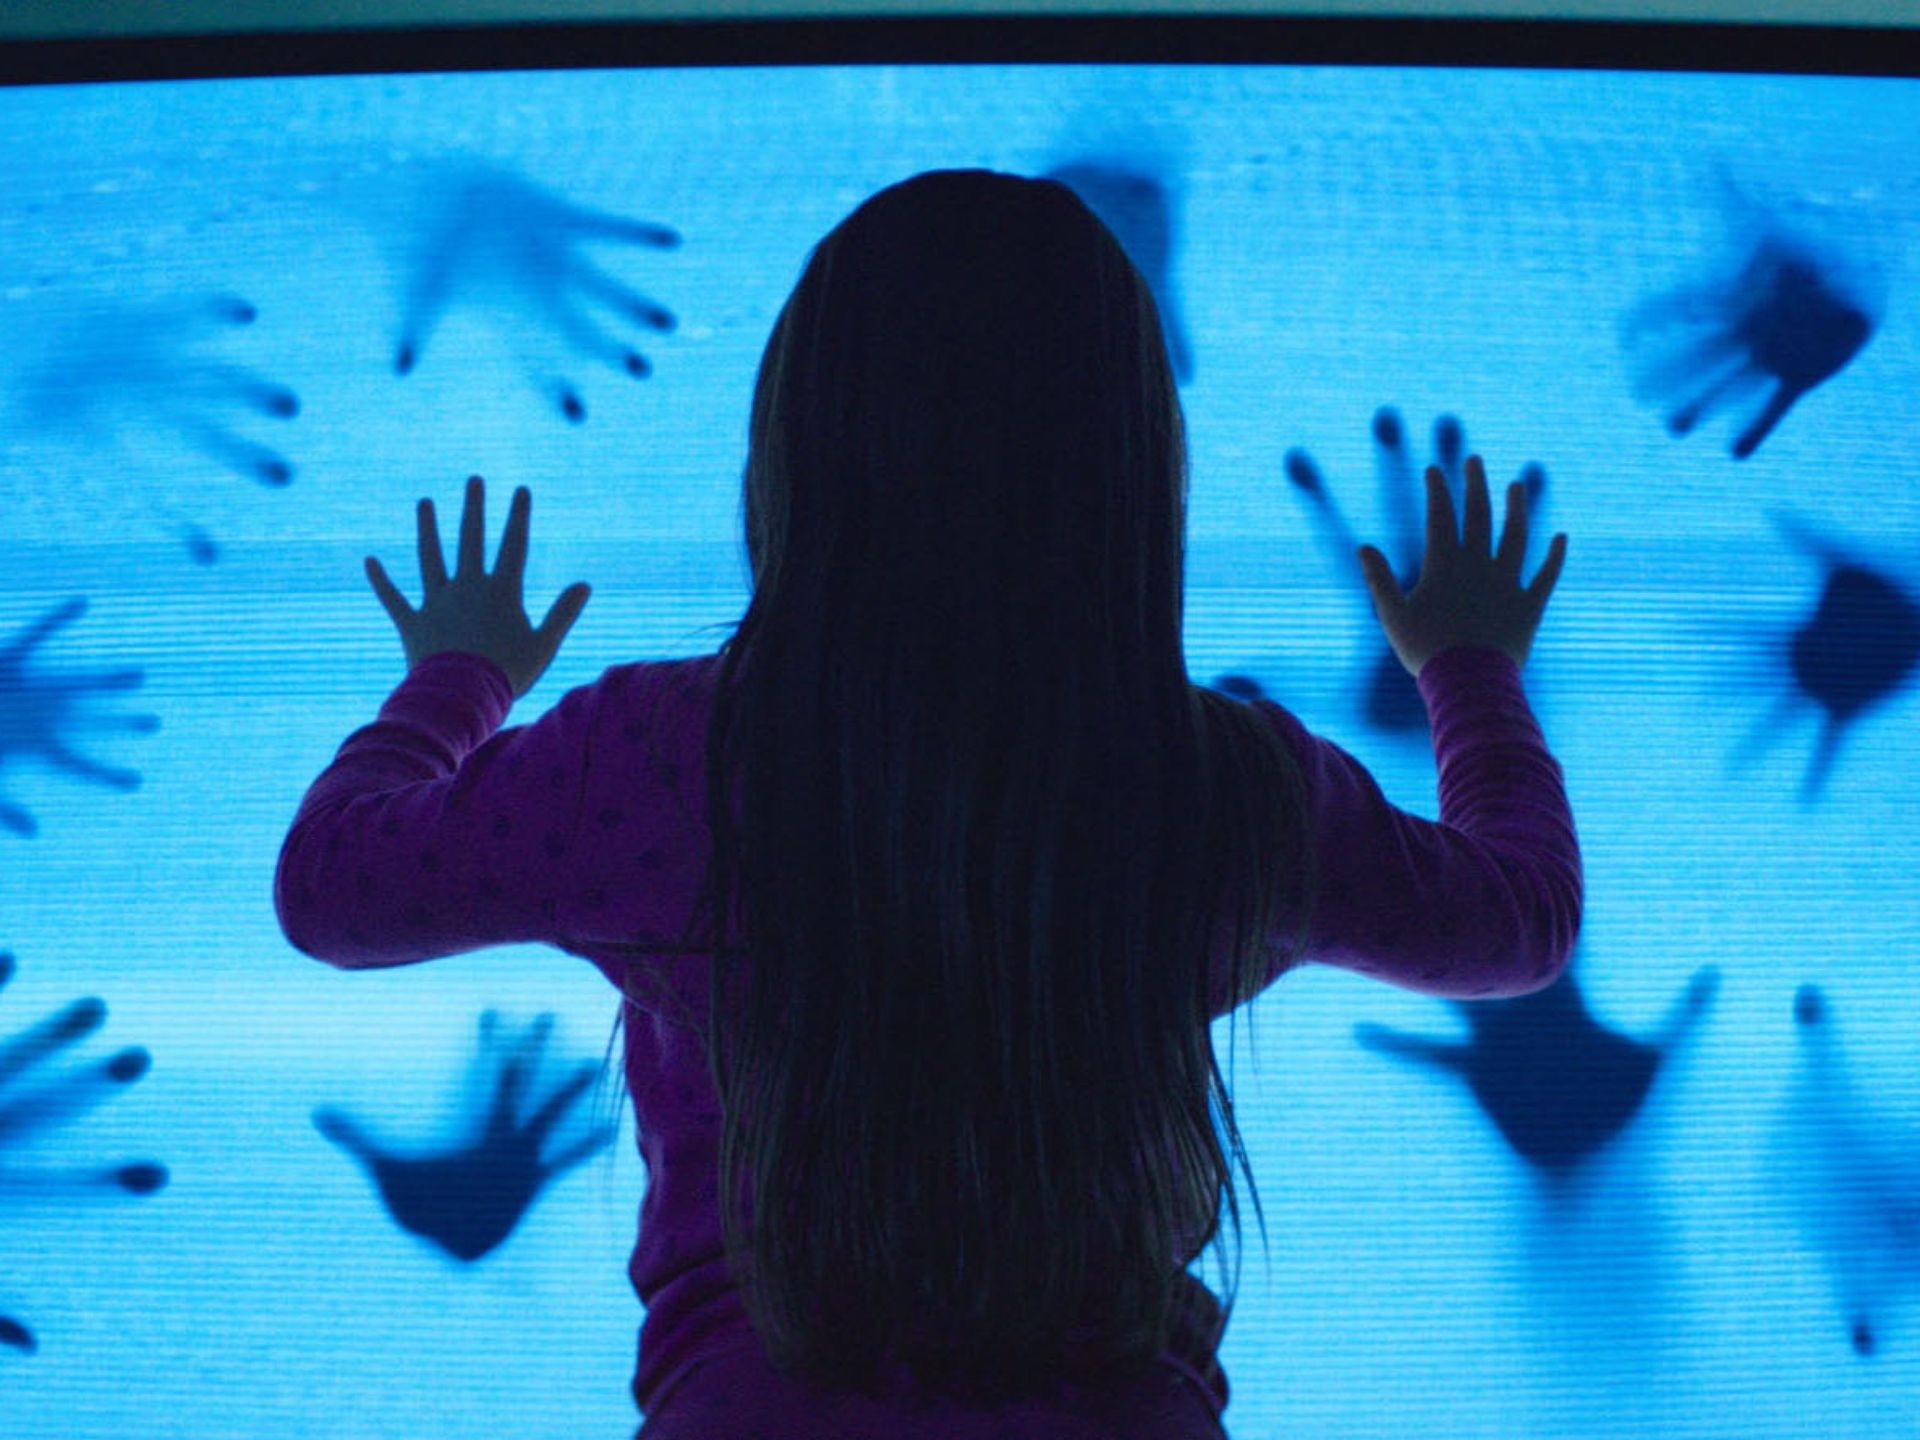 Check Out the First Images From the Poltergeist Remake